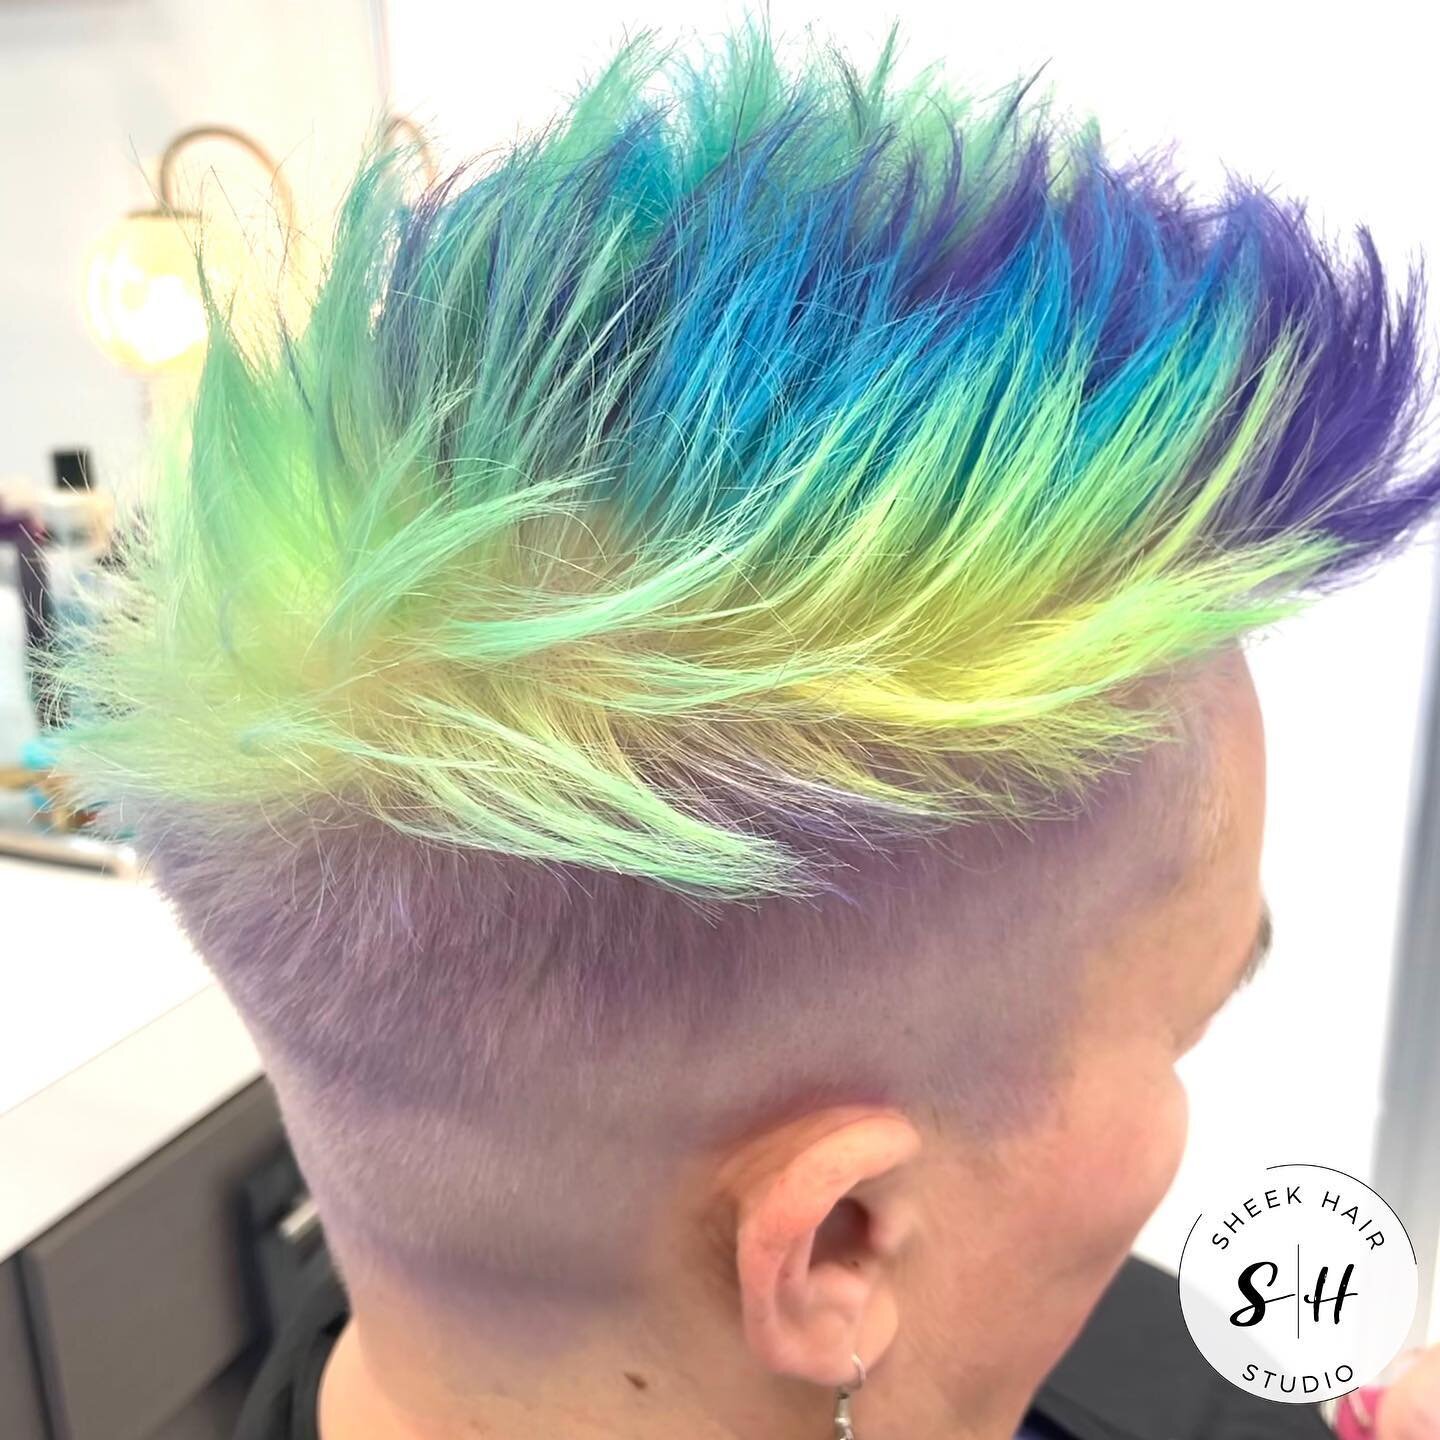 Live life in color &amp; dare to be different! 💛💚💜💙 ⠀
⠀
⠀
⠀
Let us help you with your hair transformation! Book your appointment today by clicking the &ldquo;Book Now&rdquo; button or call/text us at 469-655-0770 📱